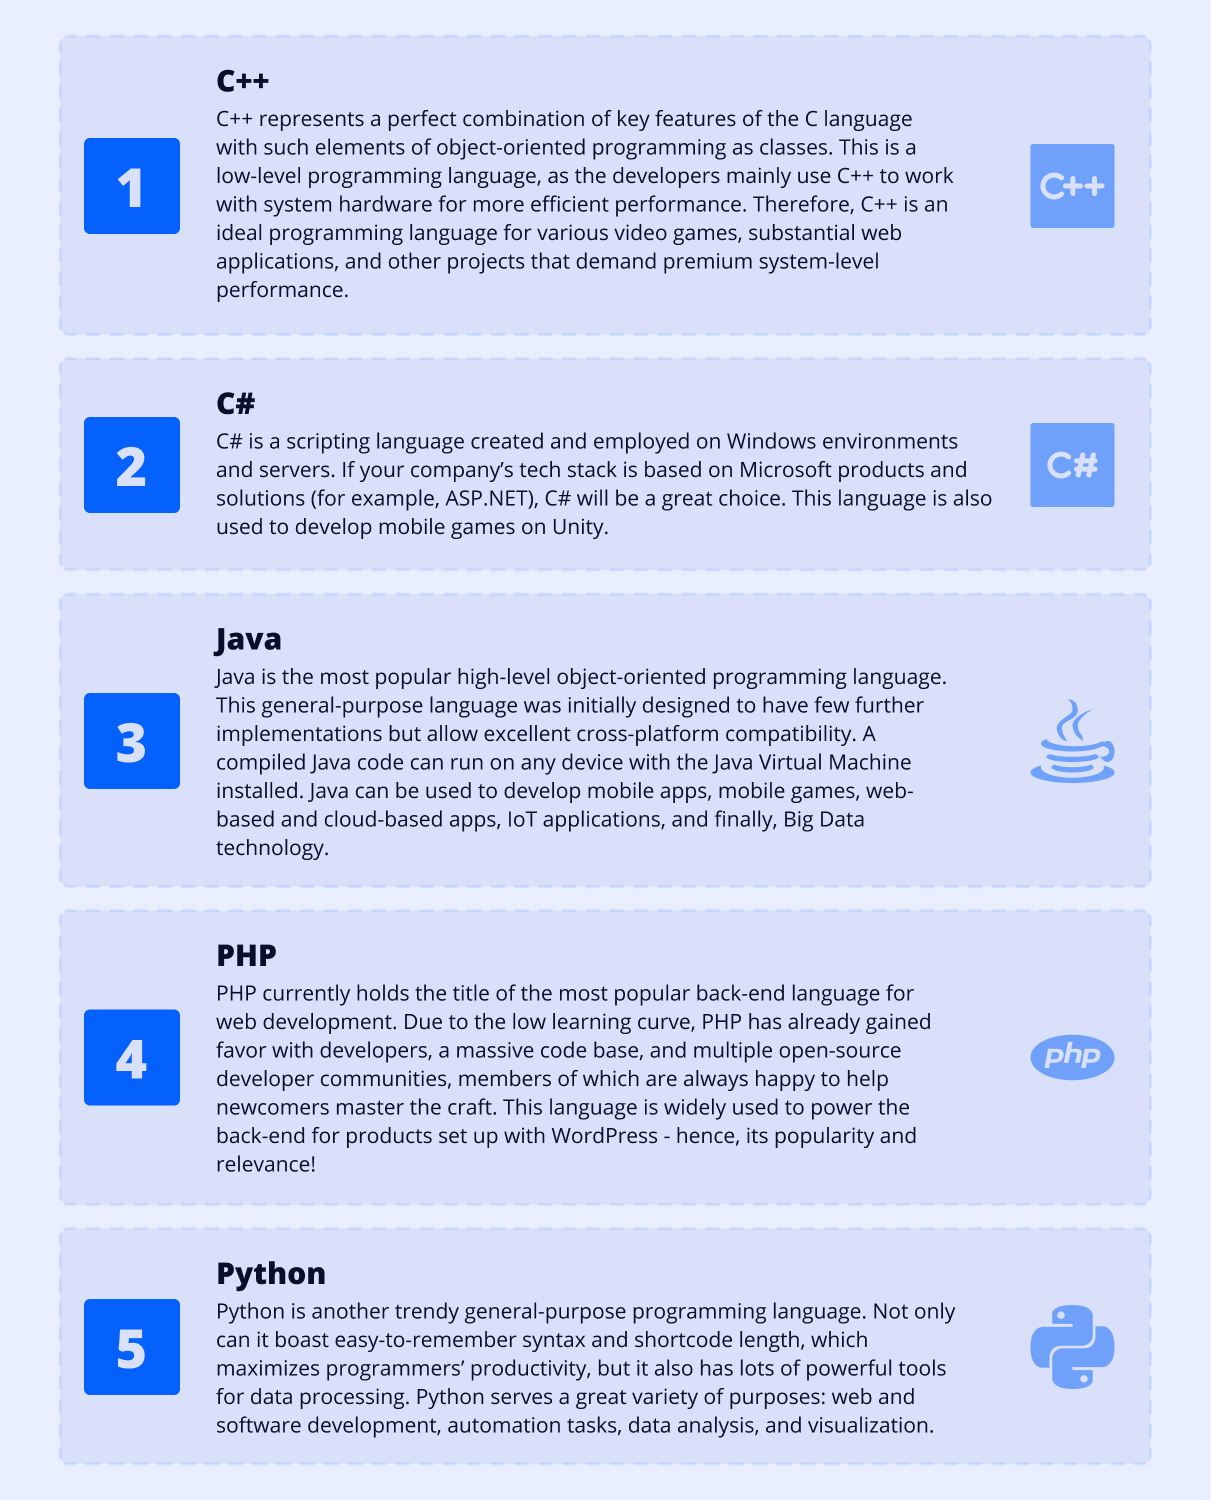 Types of the most popular and demanded Back-End languages